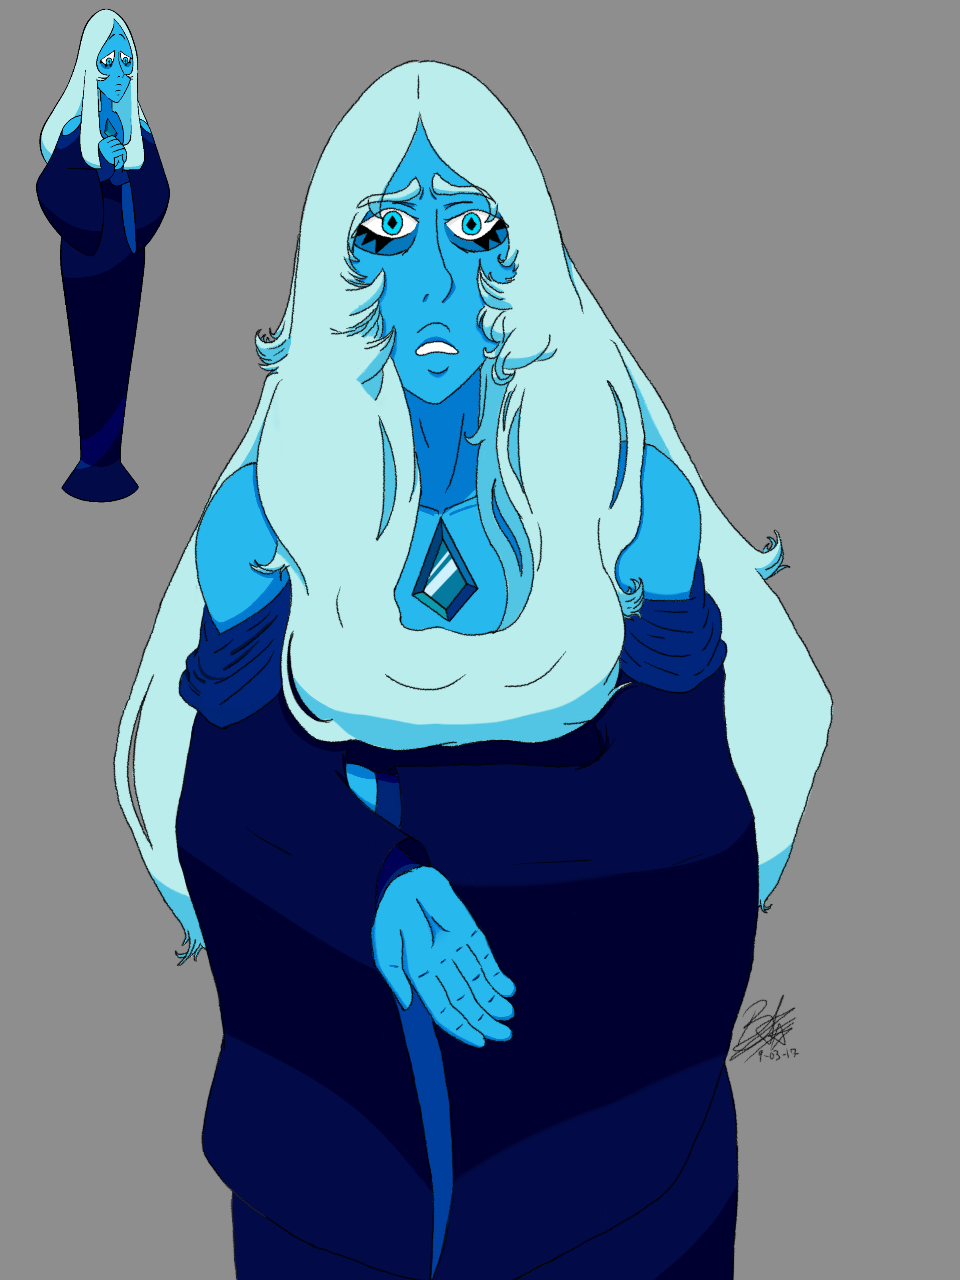 I tried making the Blue Diamond drawing digital. It’s meh for me but hey, it’s something.